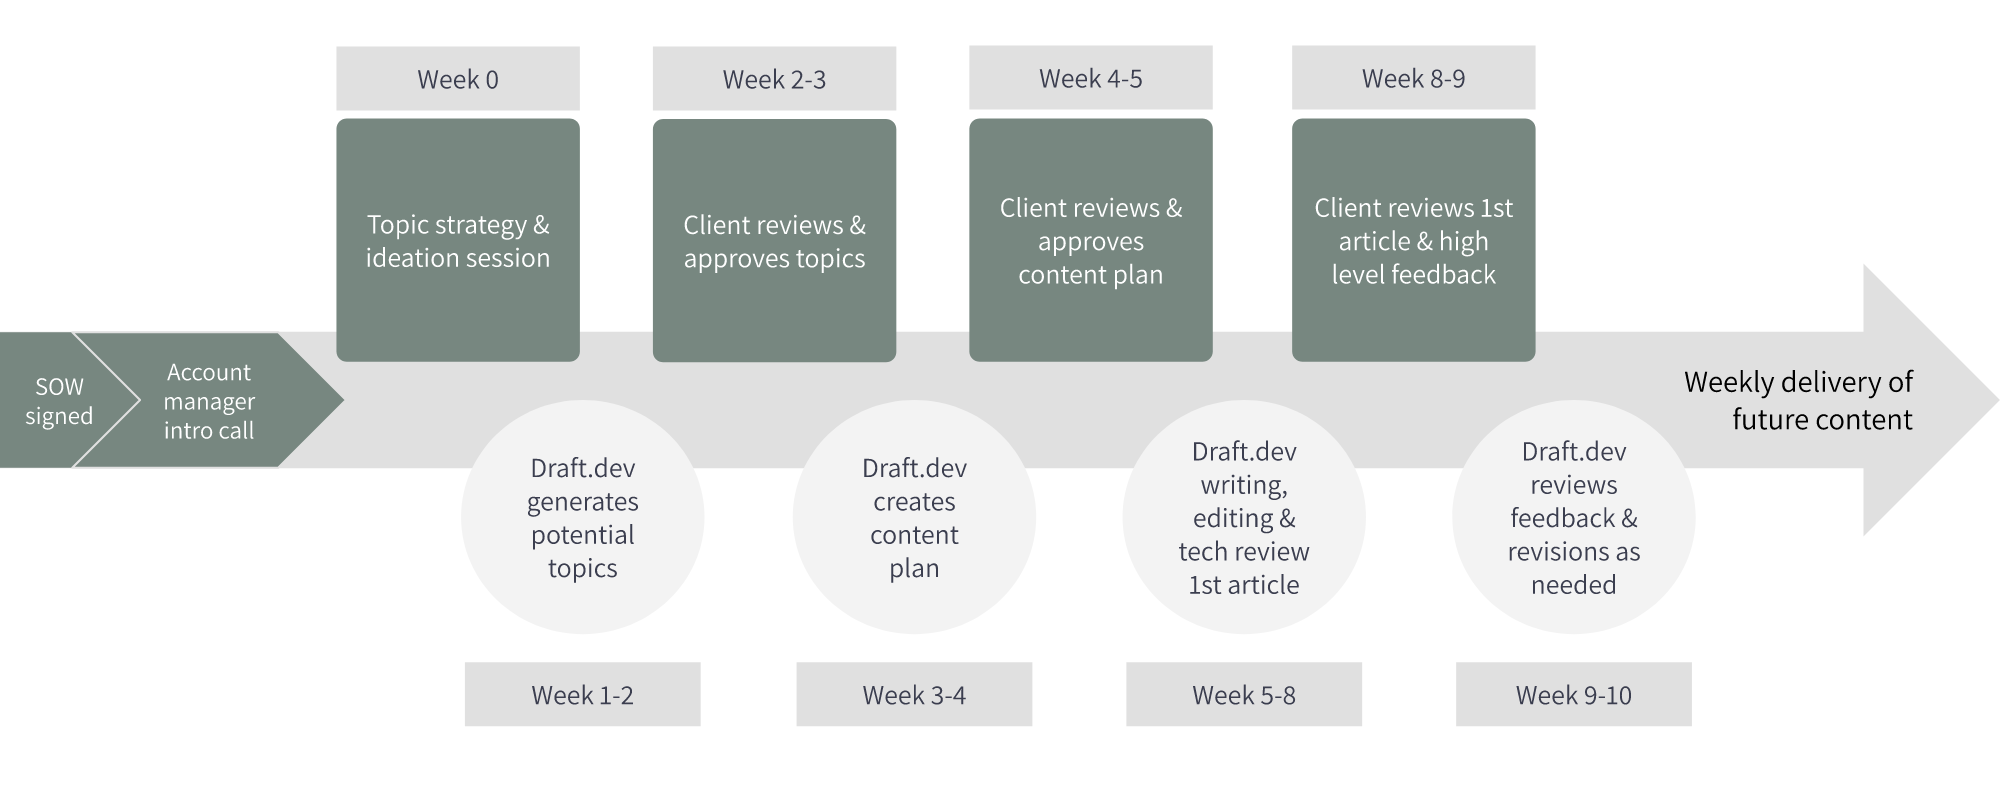 Map of the whole client onboarding process at Draft.dev